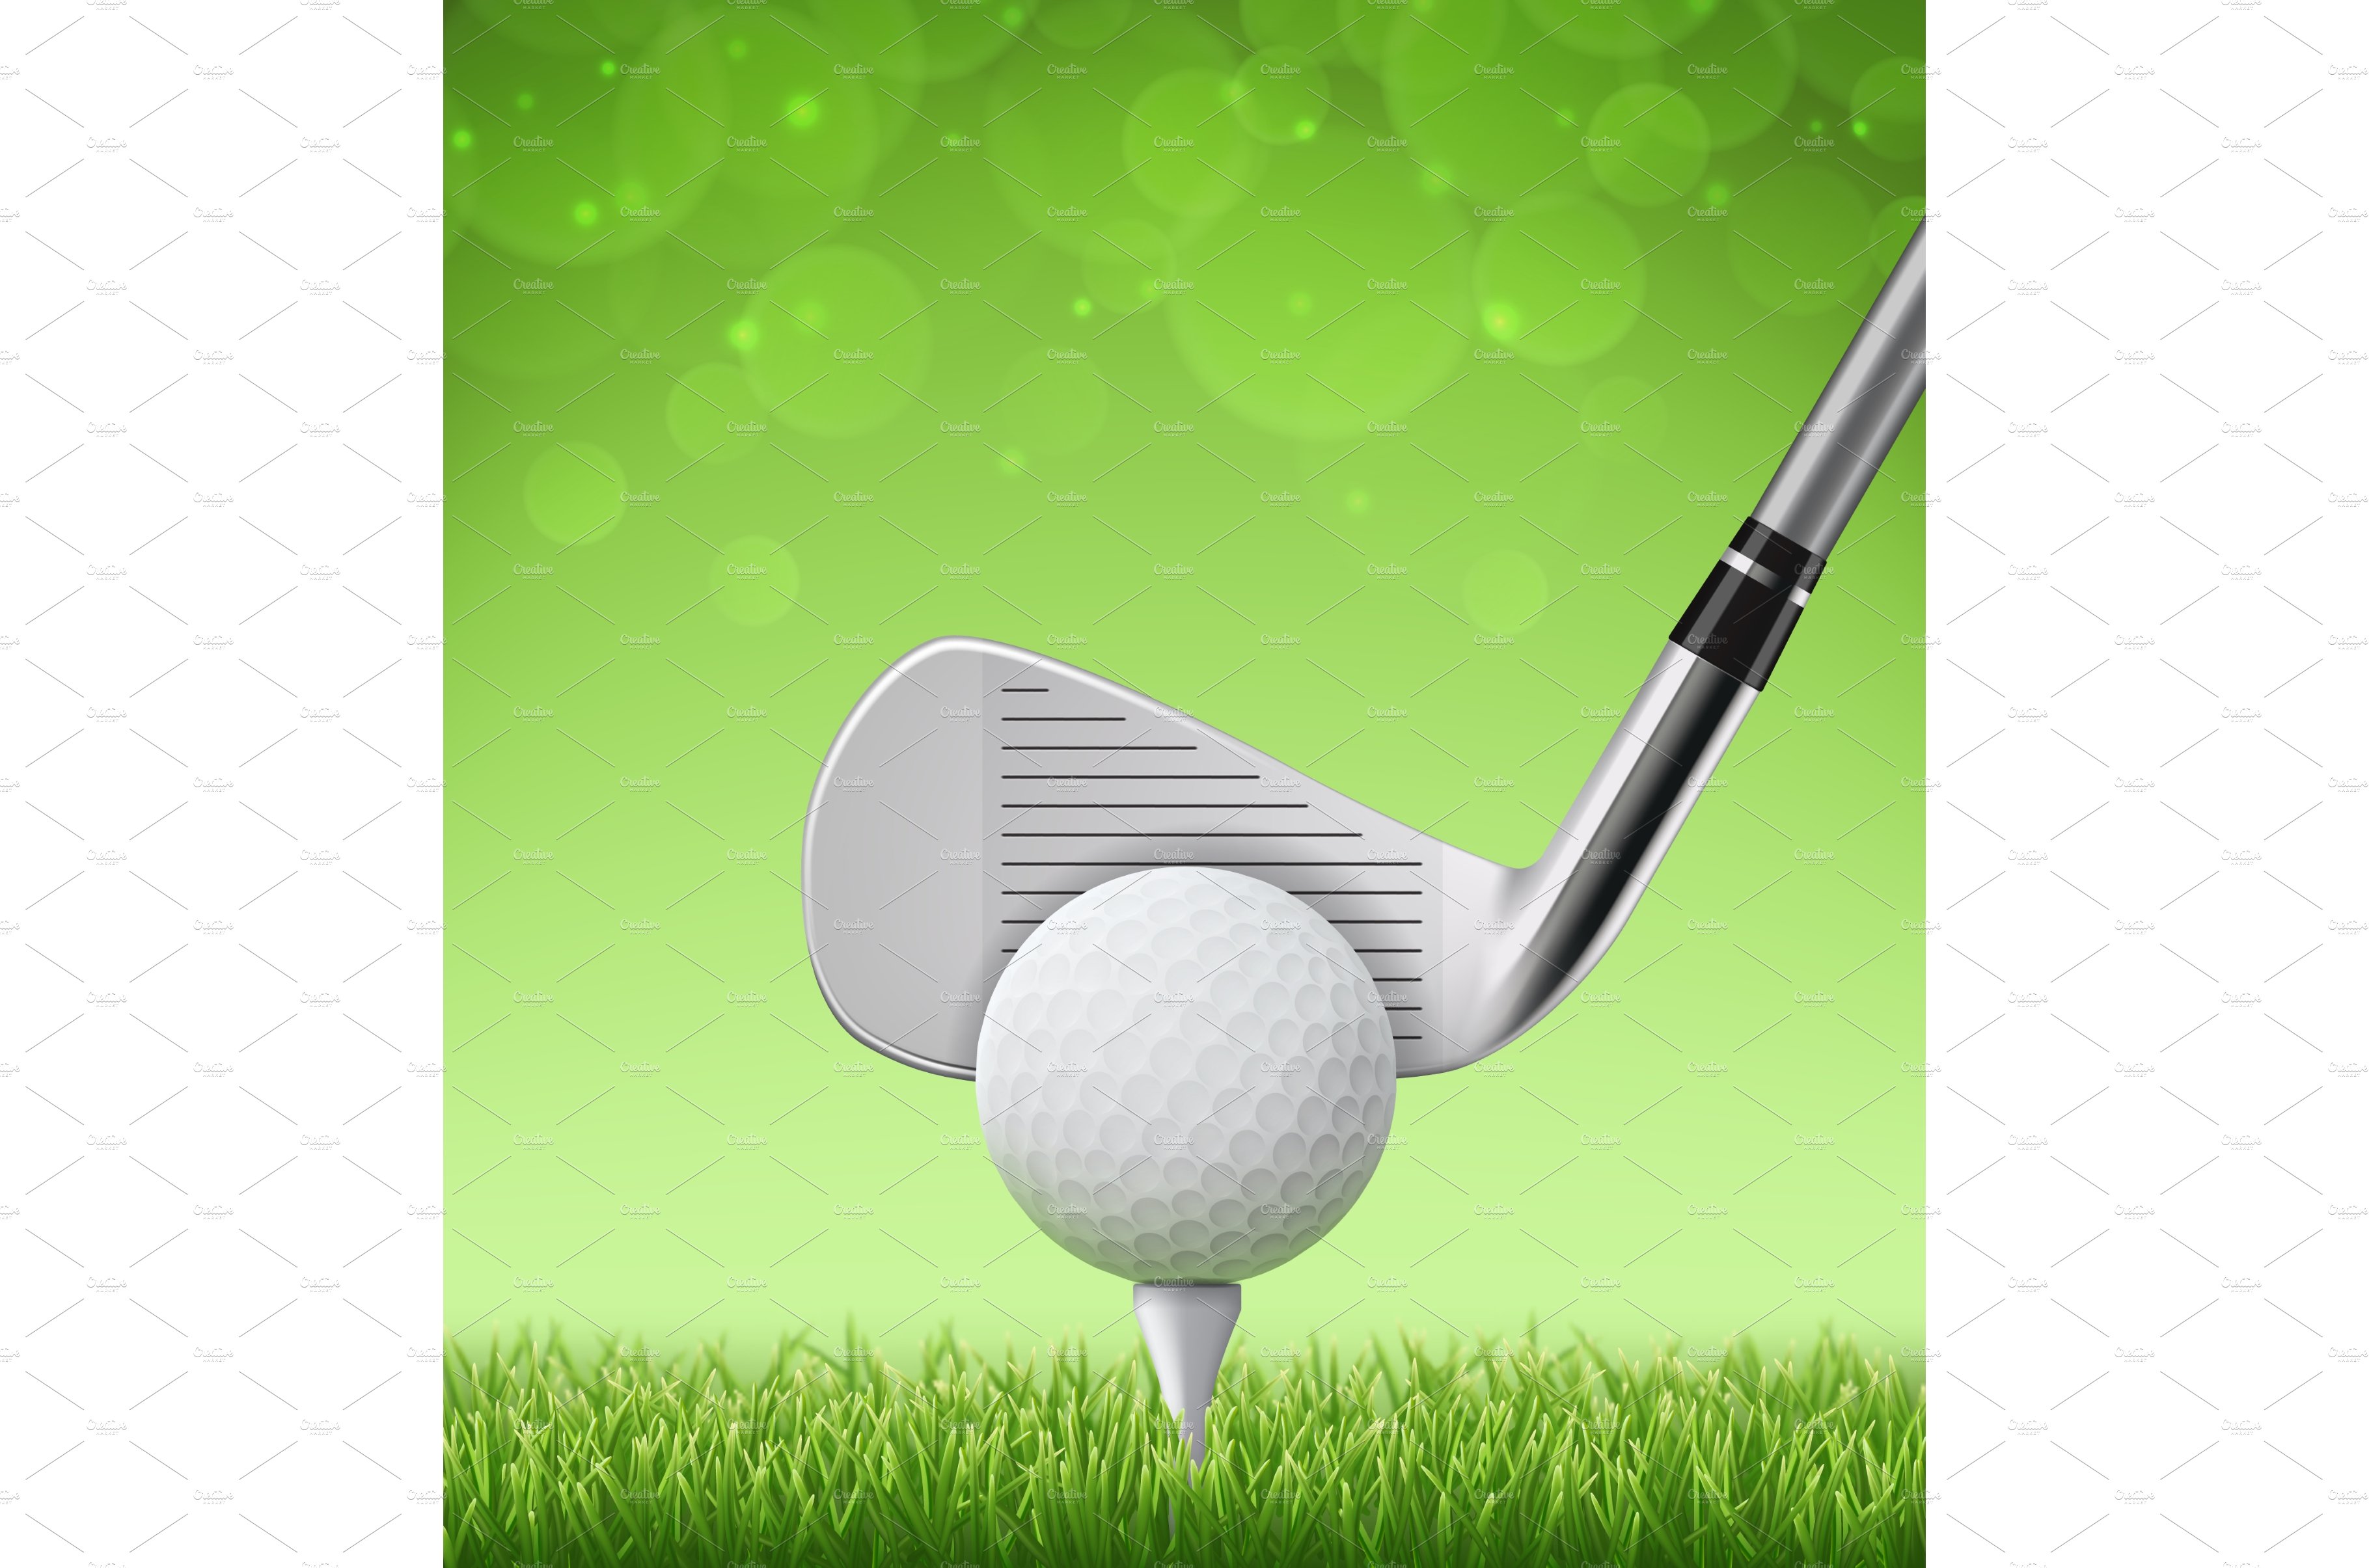 Golf club and ball stick tee cover image.